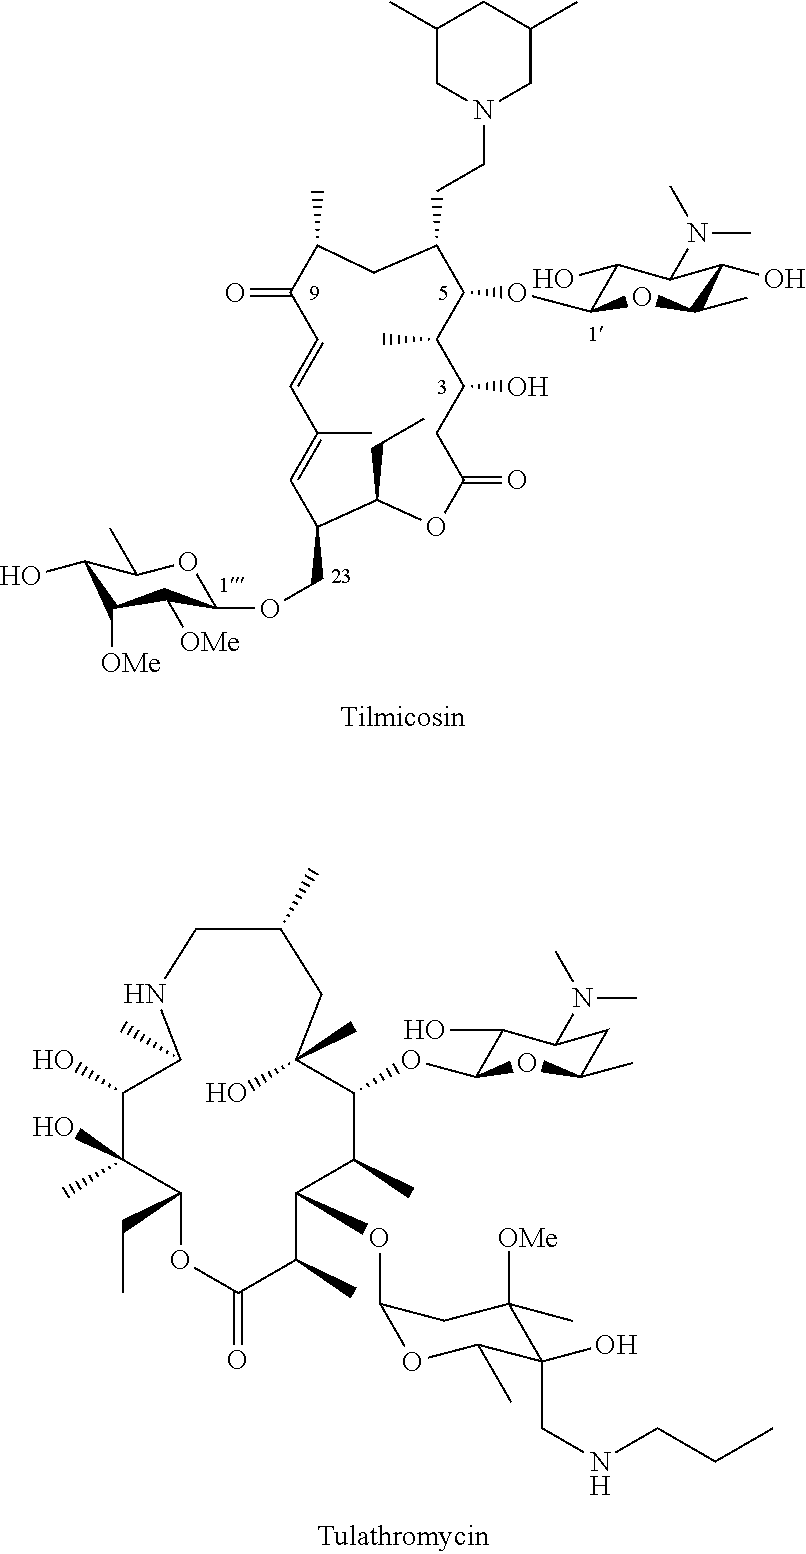 Tylosin derivatives and method for preparation thereof